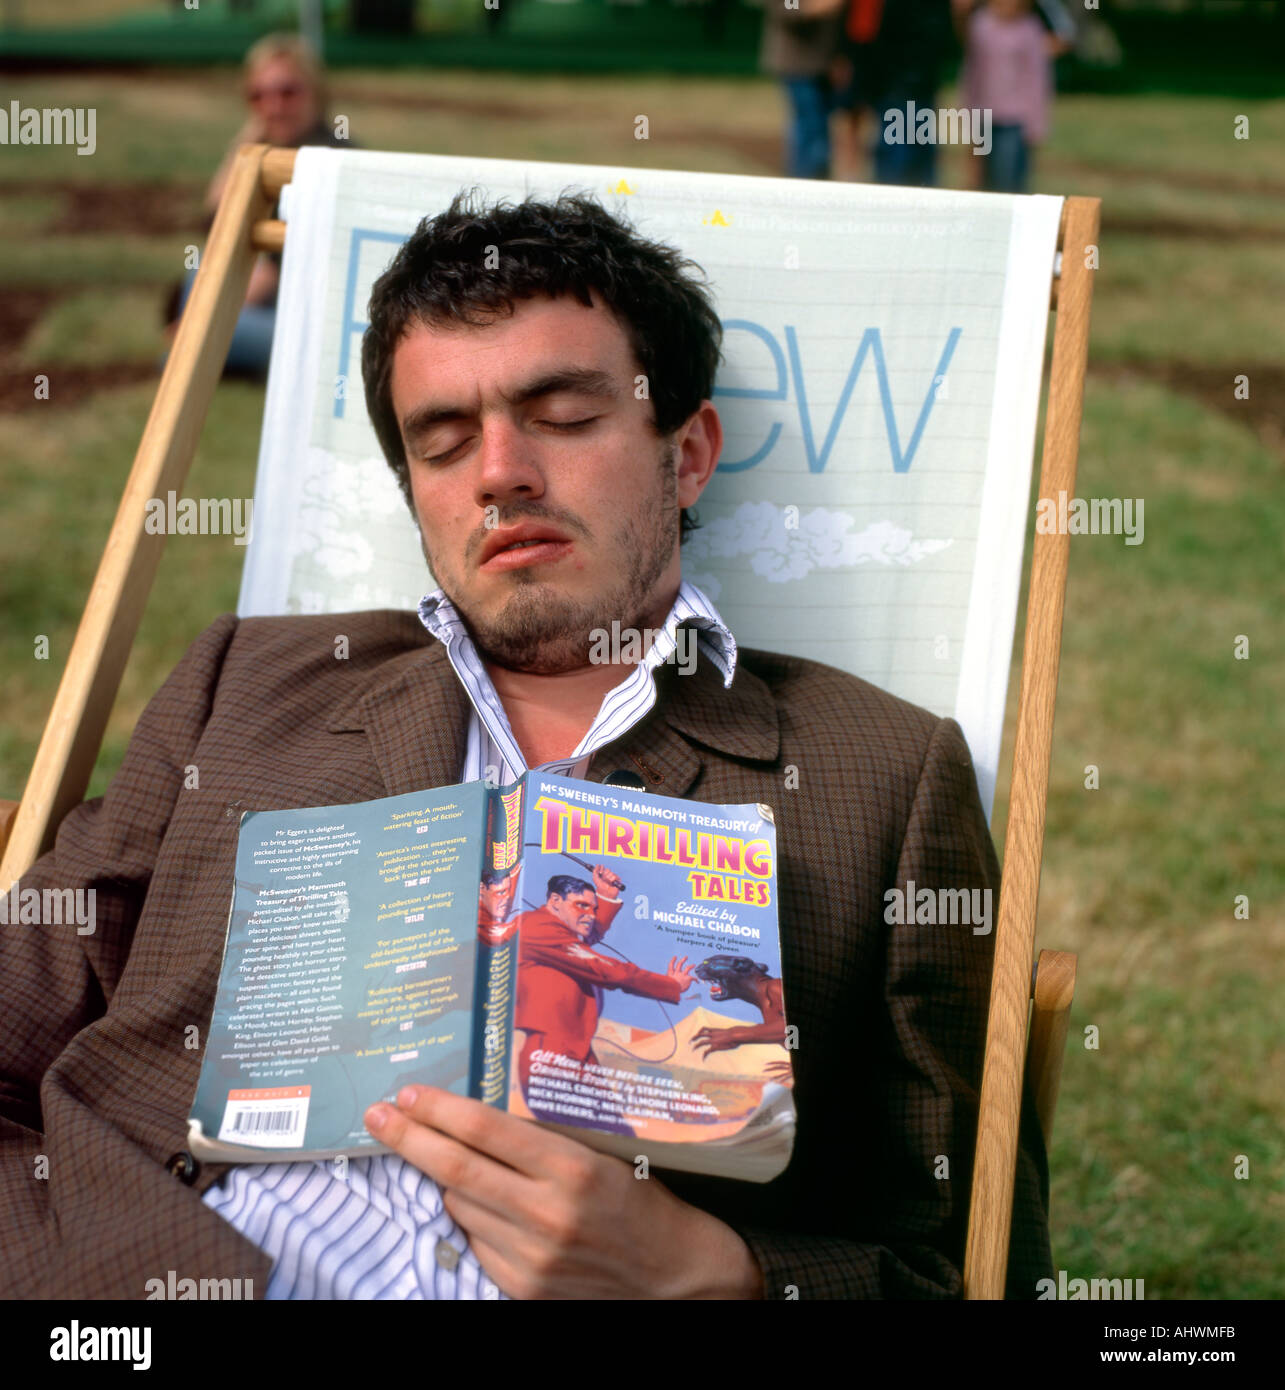 A young man fallen asleep in a deckchair while reading Thrilling Tales book at the Hay Festival Hay on Wye Powys Wales  UK KATHY DEWITT Stock Photo